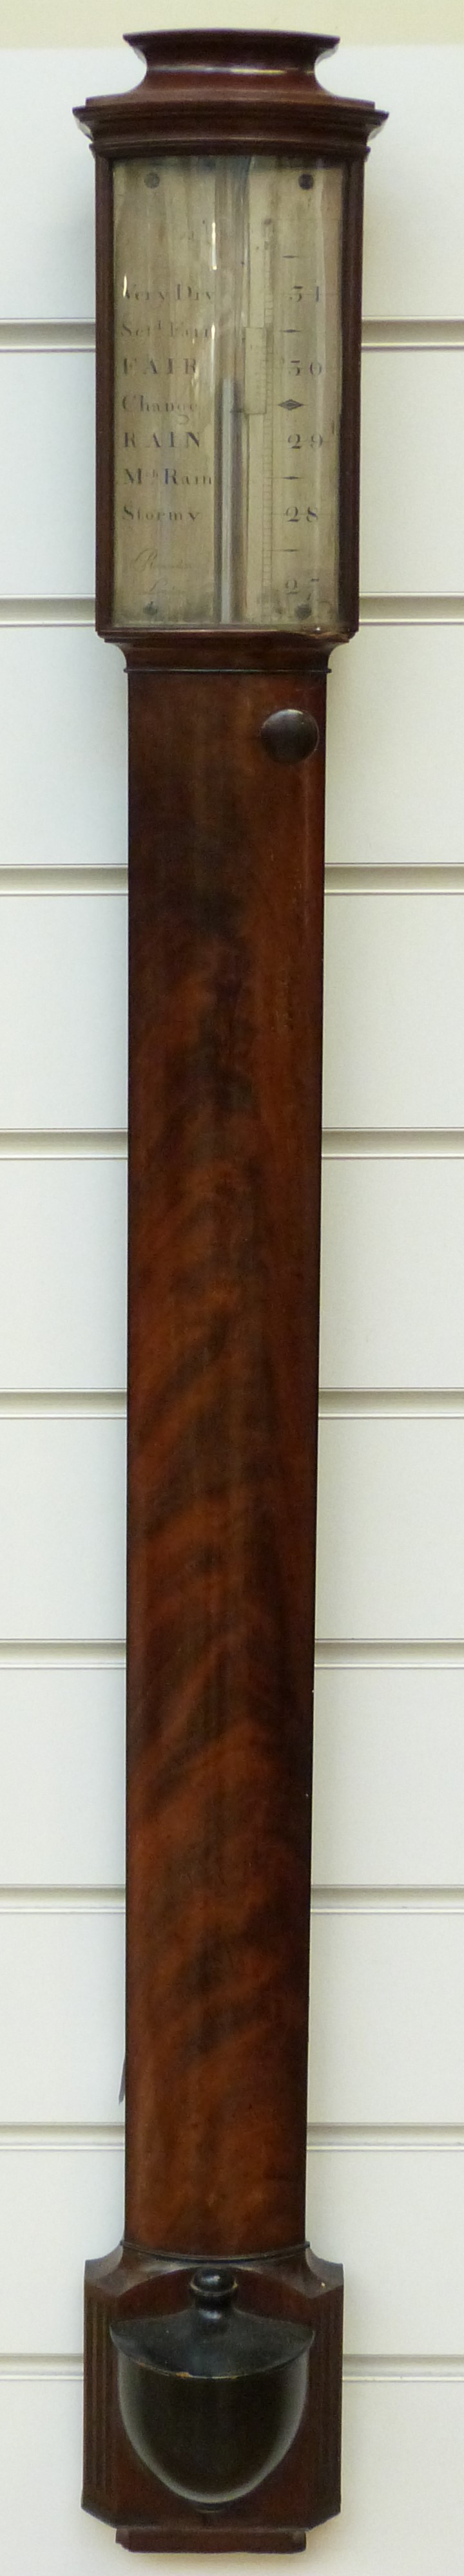 A Georgian Flame Mahogany Stick Barometer By Ramsden. Sold For £2800